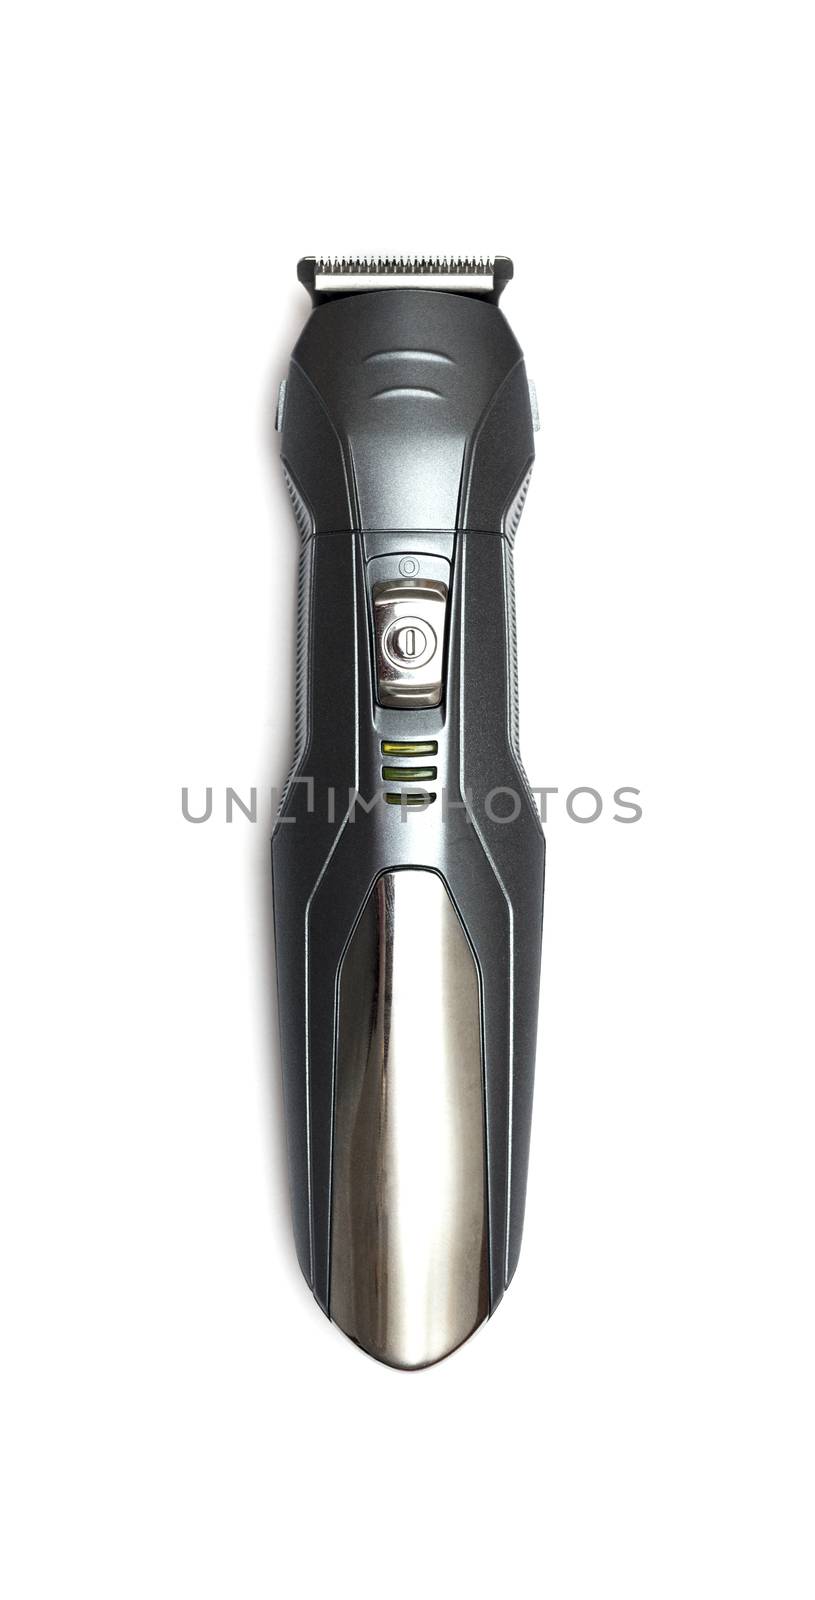 Black hair clippers closeup isolated on white background